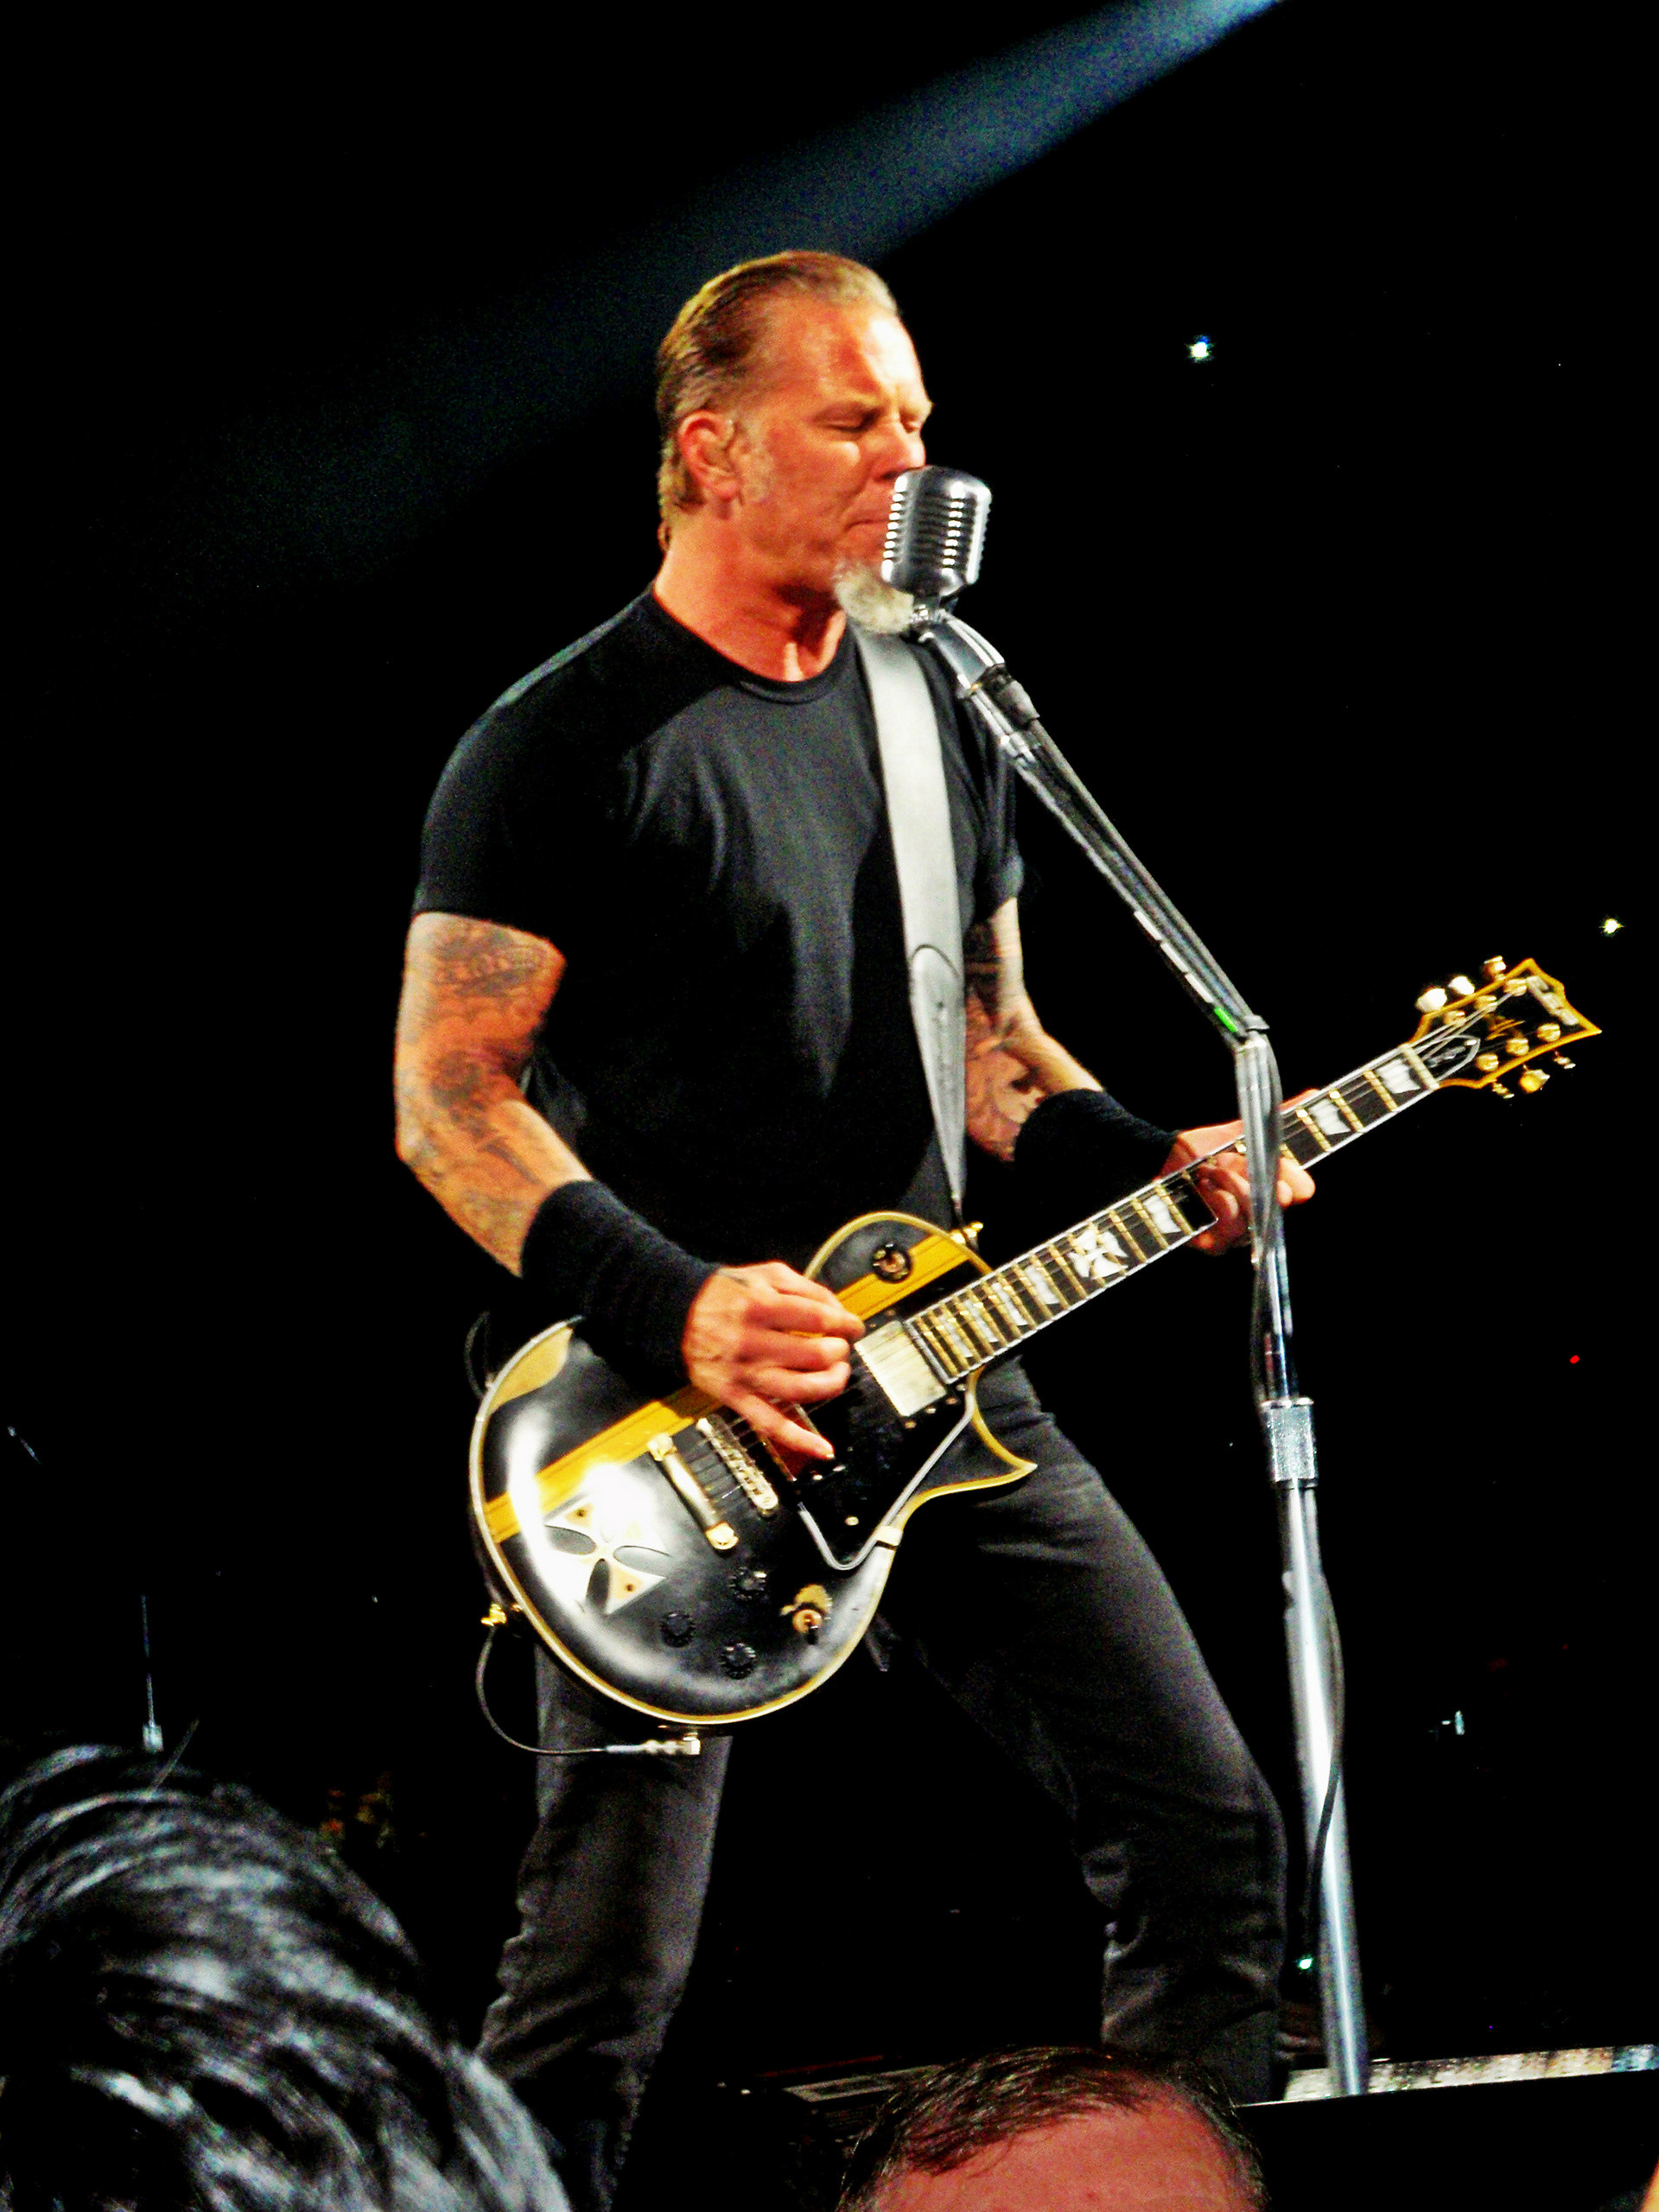 1920x2560 James Hetfield images James HD wallpaper and background photos